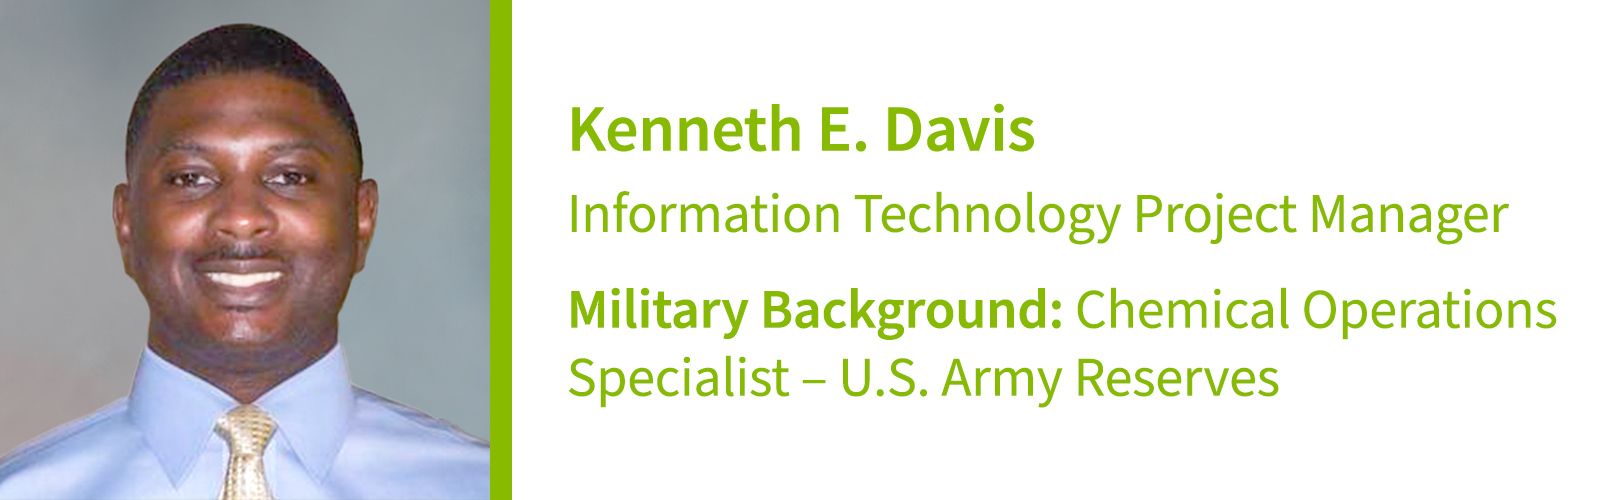 Kenneth E. Davis, , Information Technology Project Manager Military Background: Chemical Operations Specialist – U.S. Army Reserves